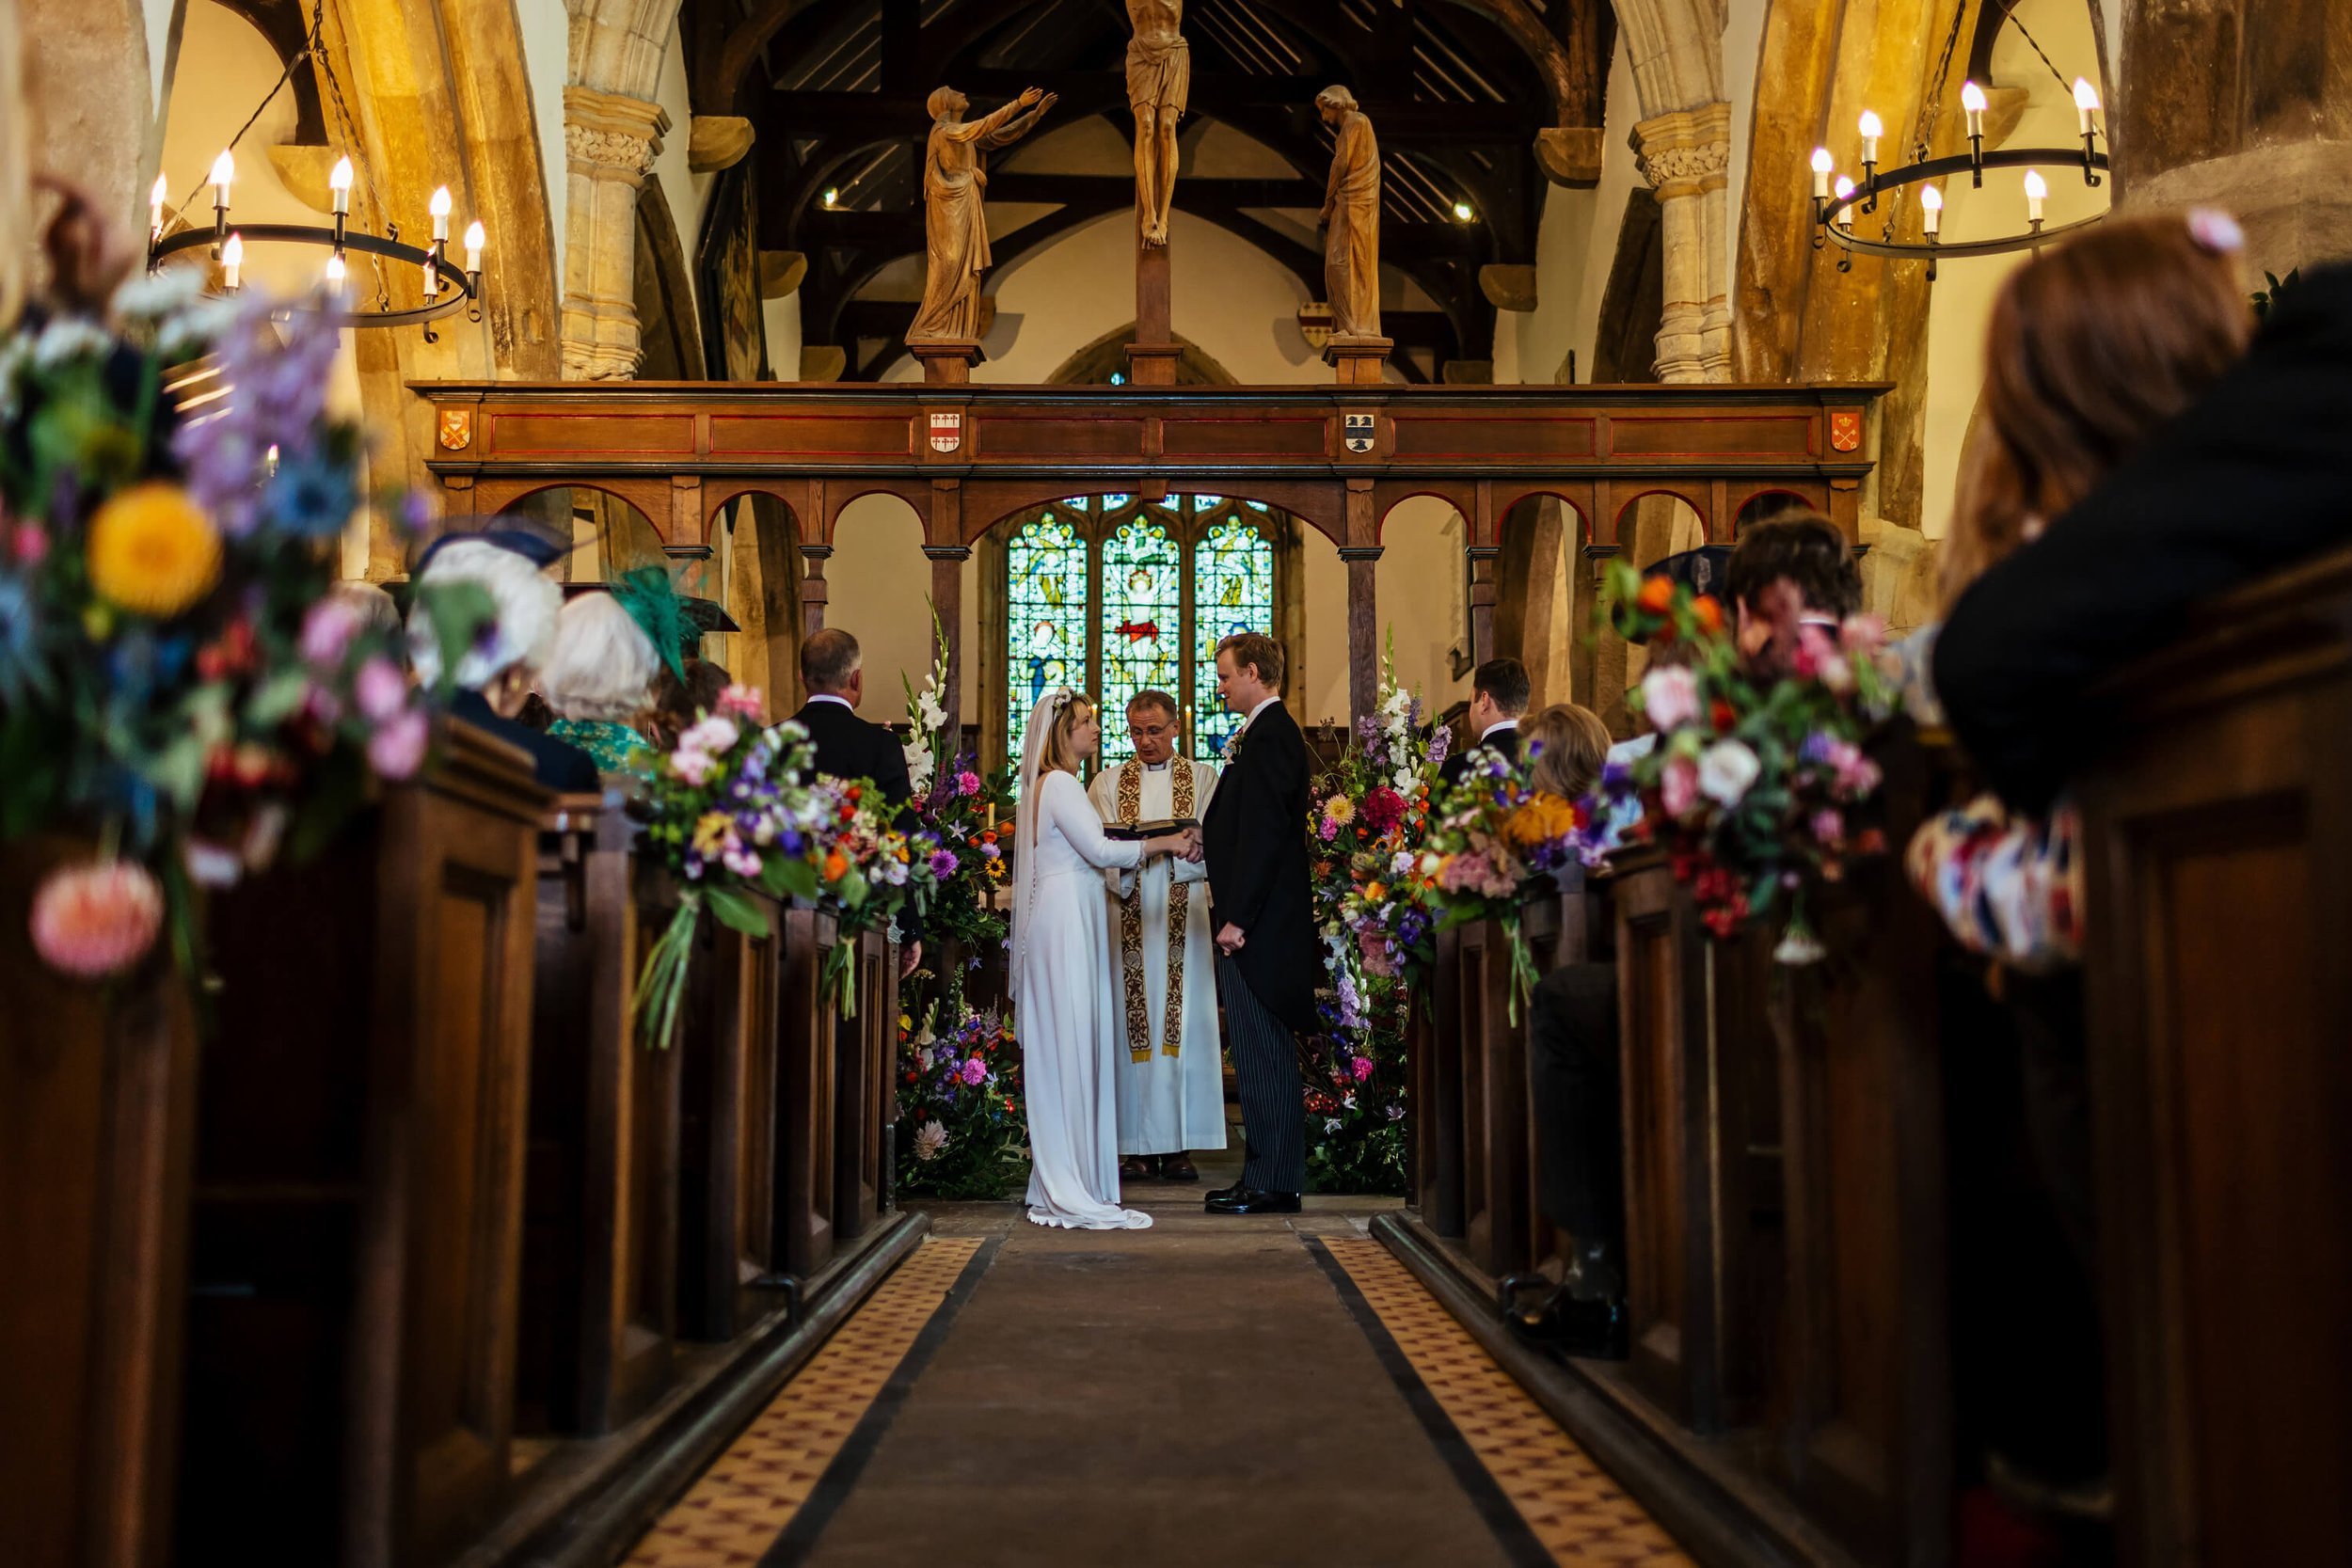 Bride and groom hold hands during their wedding ceremony in Yorkshire